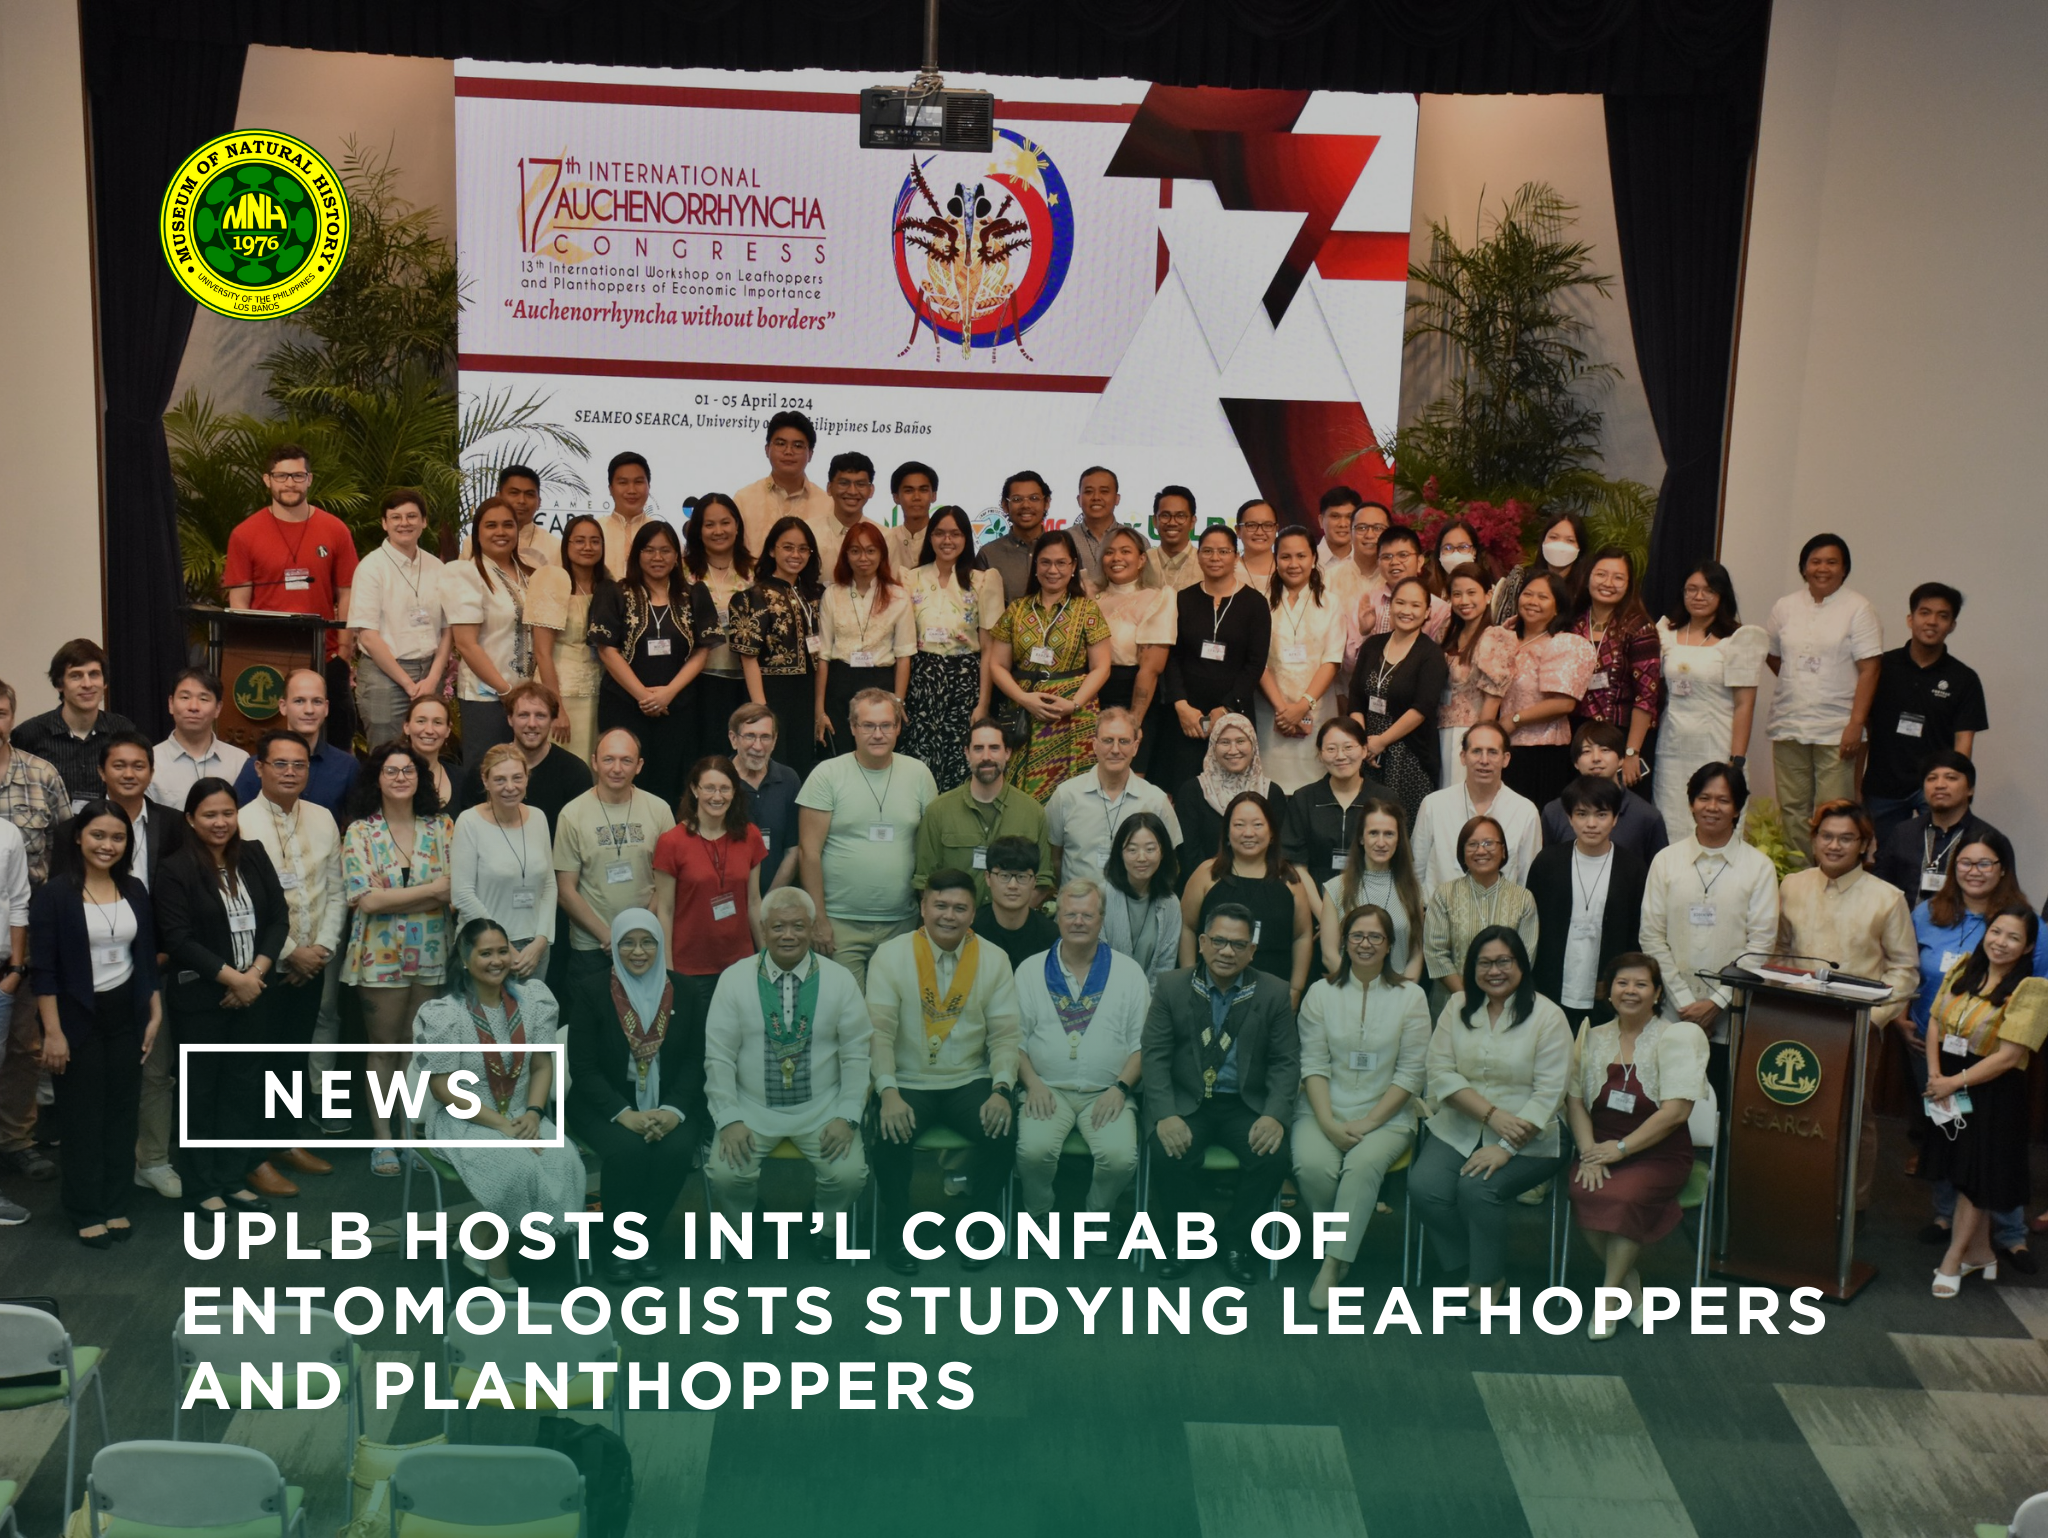 UPLB hosts int’l confab of entomologists studying leafhoppers and planthoppers